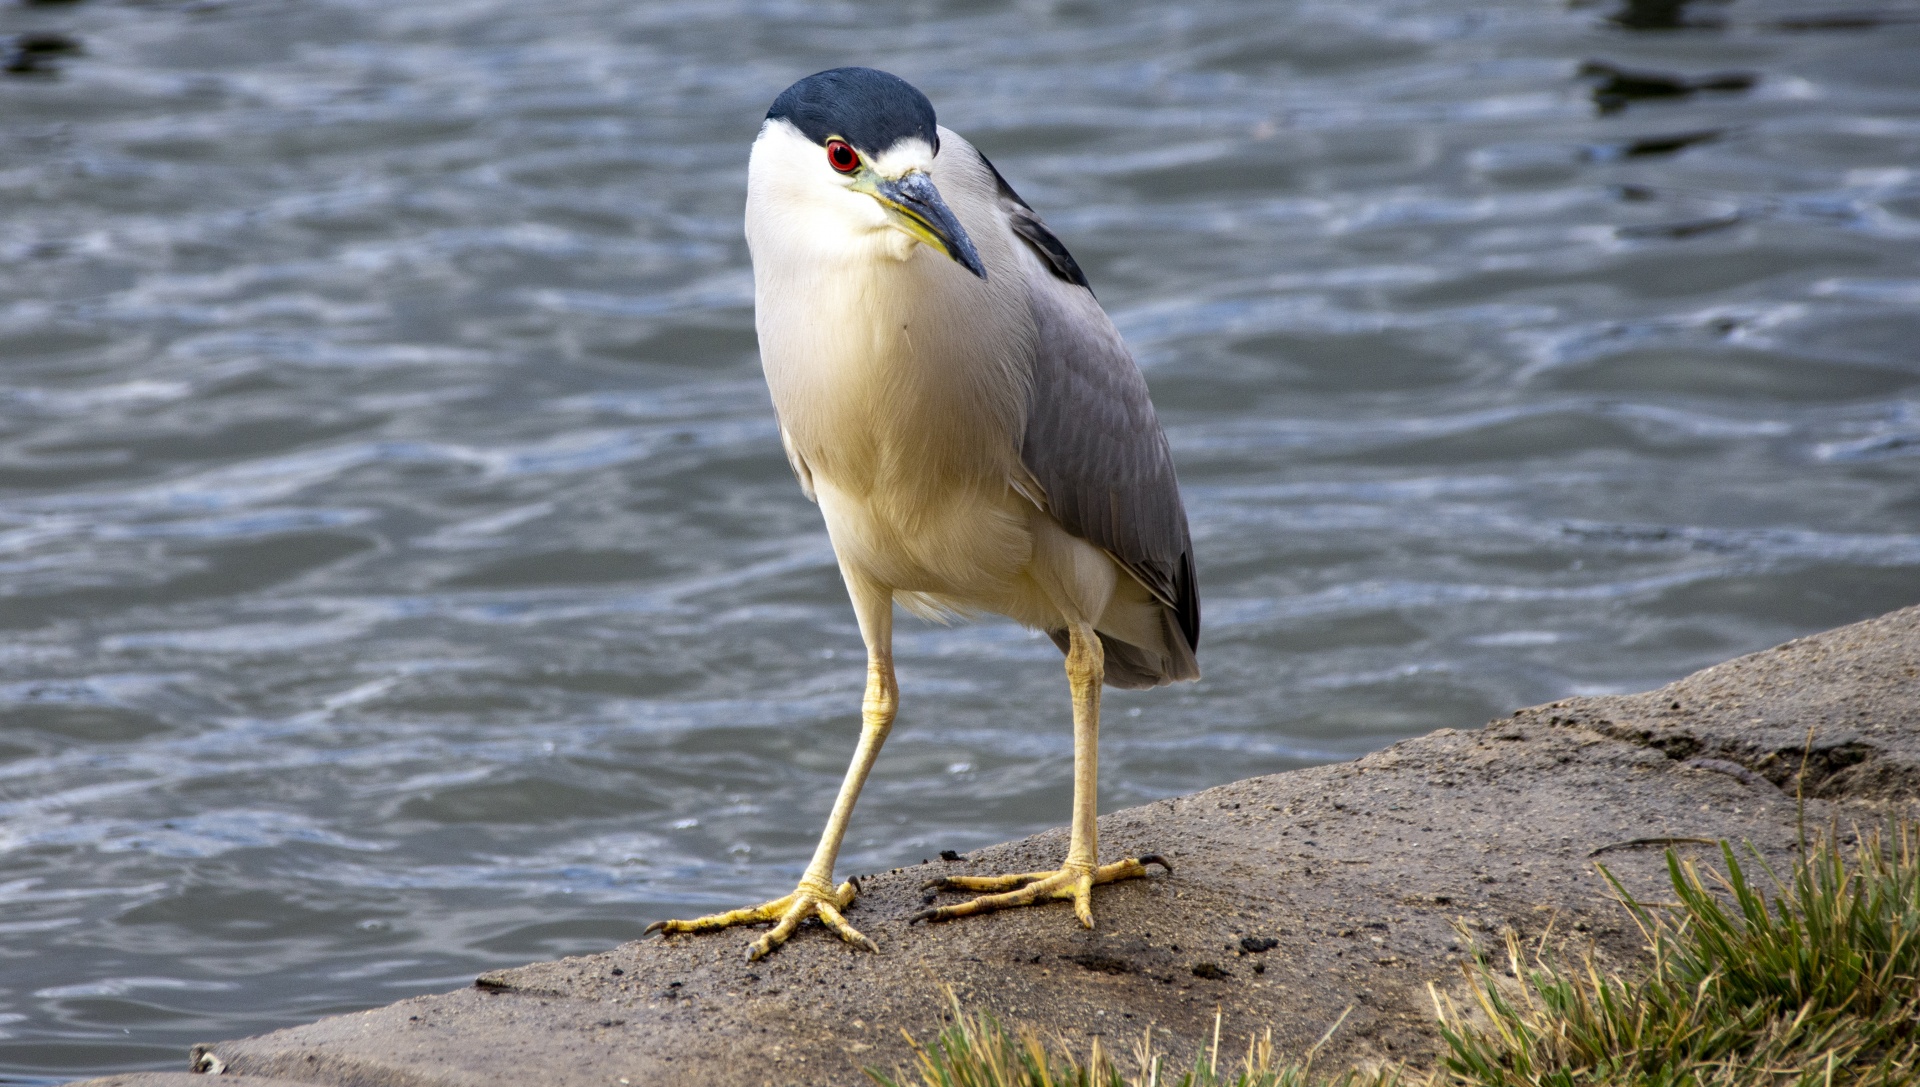 immature heron standing by the lake